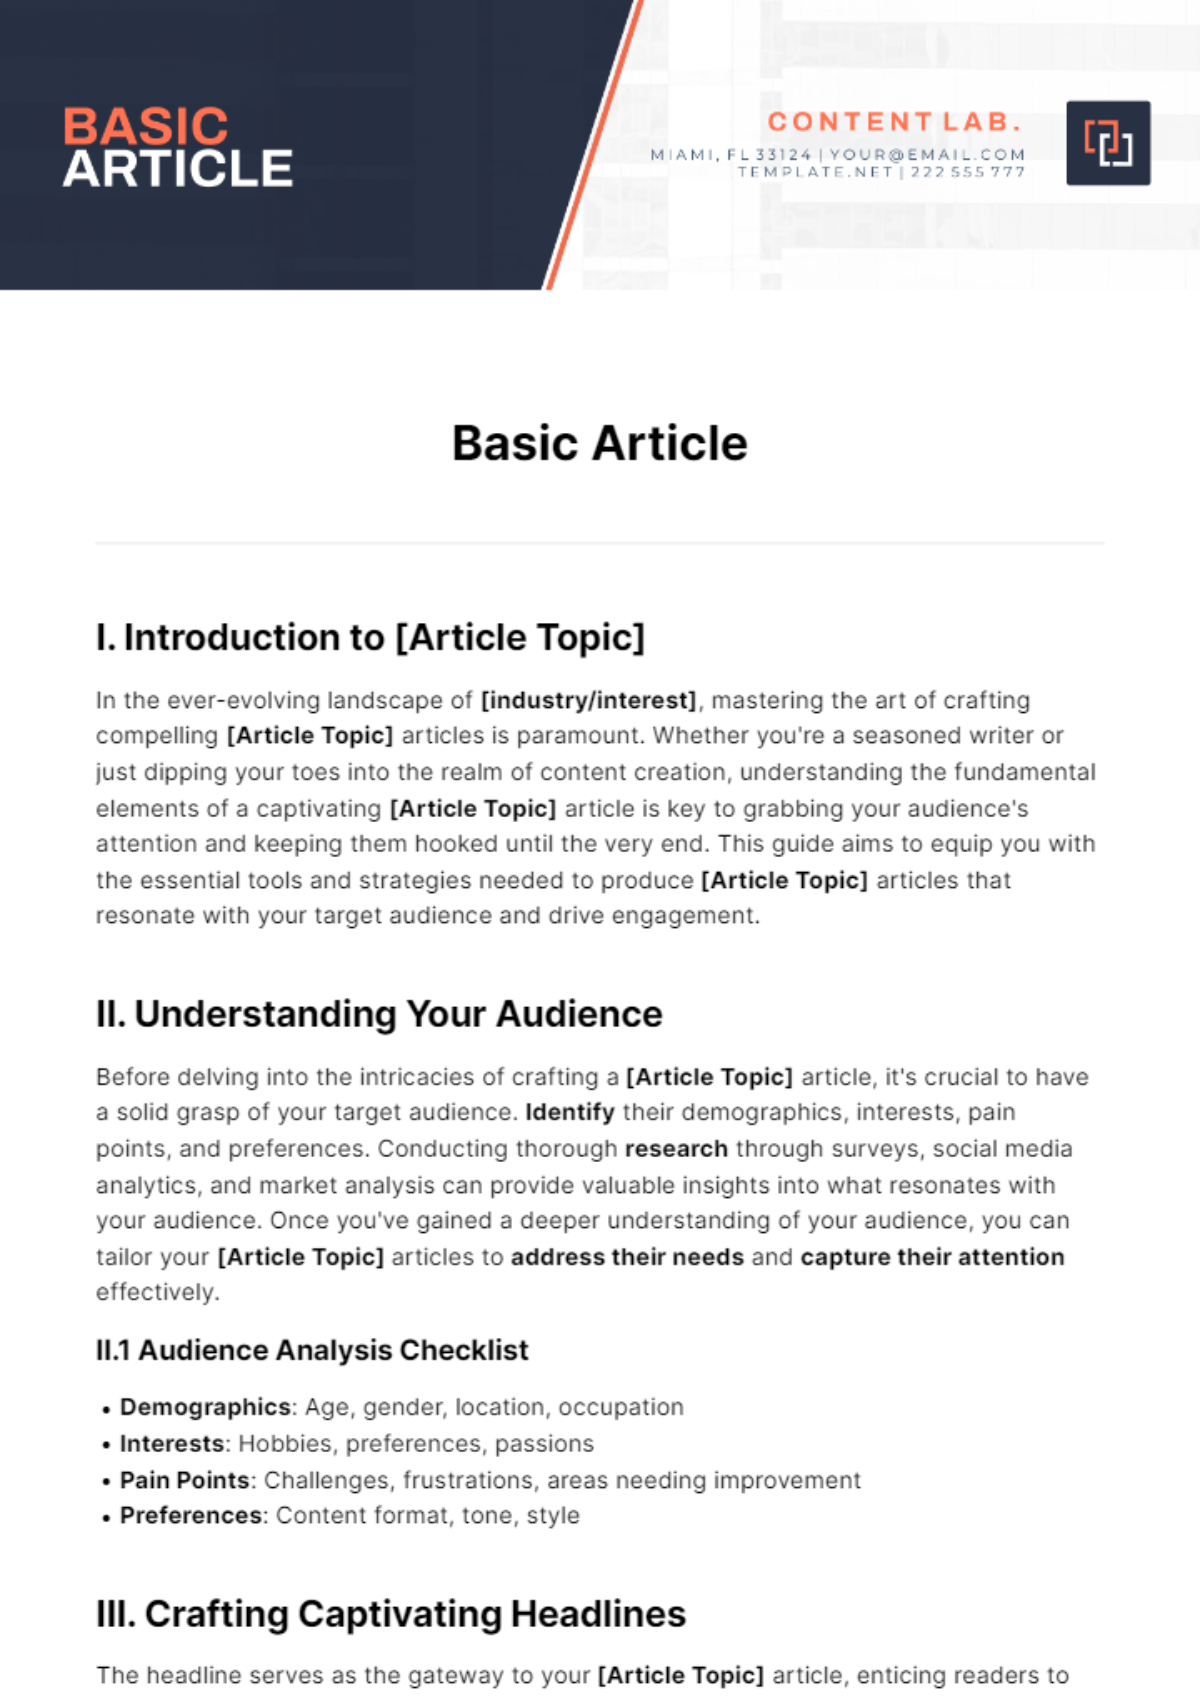 Basic Article Template